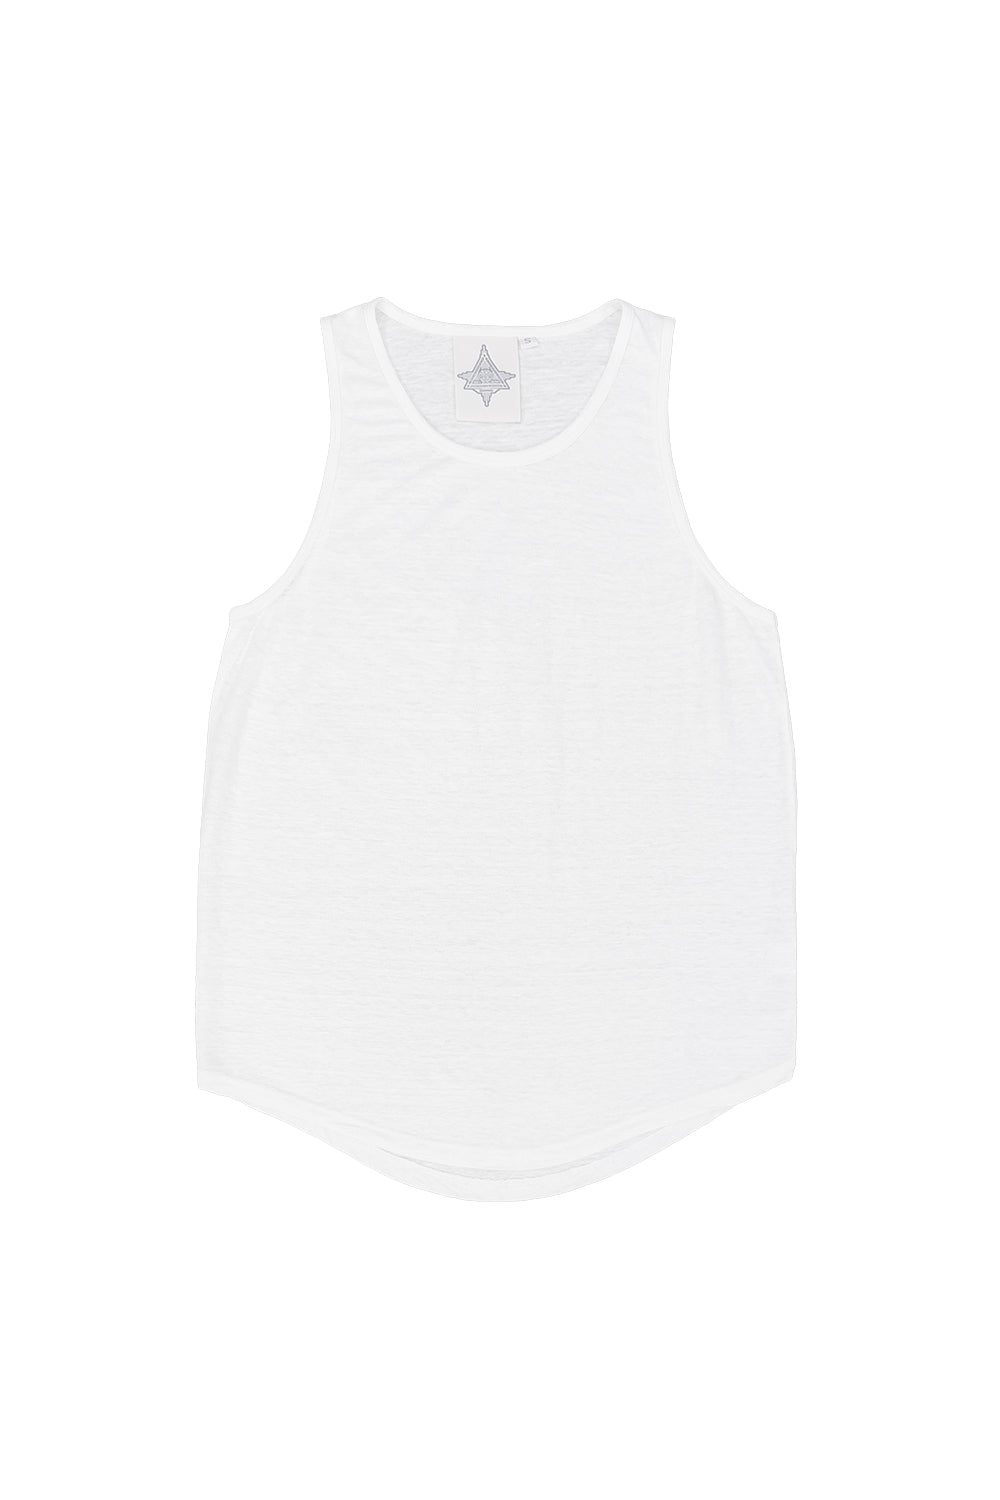 Playa 100% Tank Top | Jungmaven Hemp Clothing & Accessories / Color: Washed White